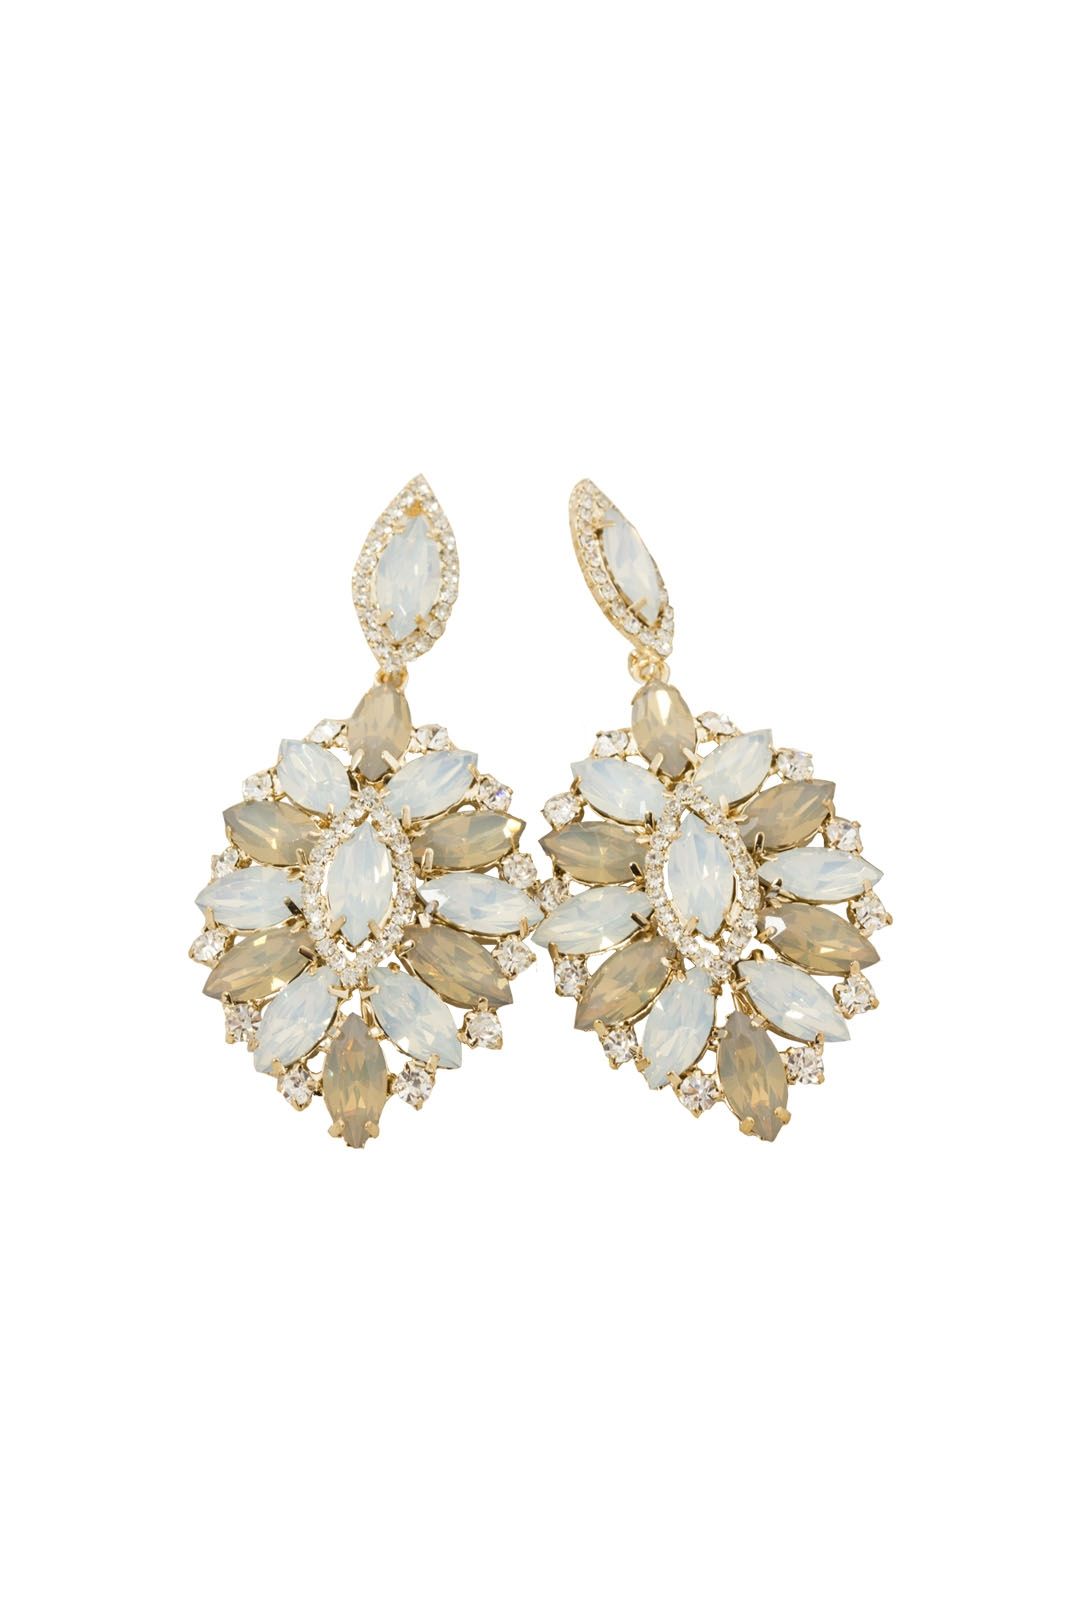 Adorne - Jewelled Petal Edge Pointed Drop Earring - White and Gold - Front